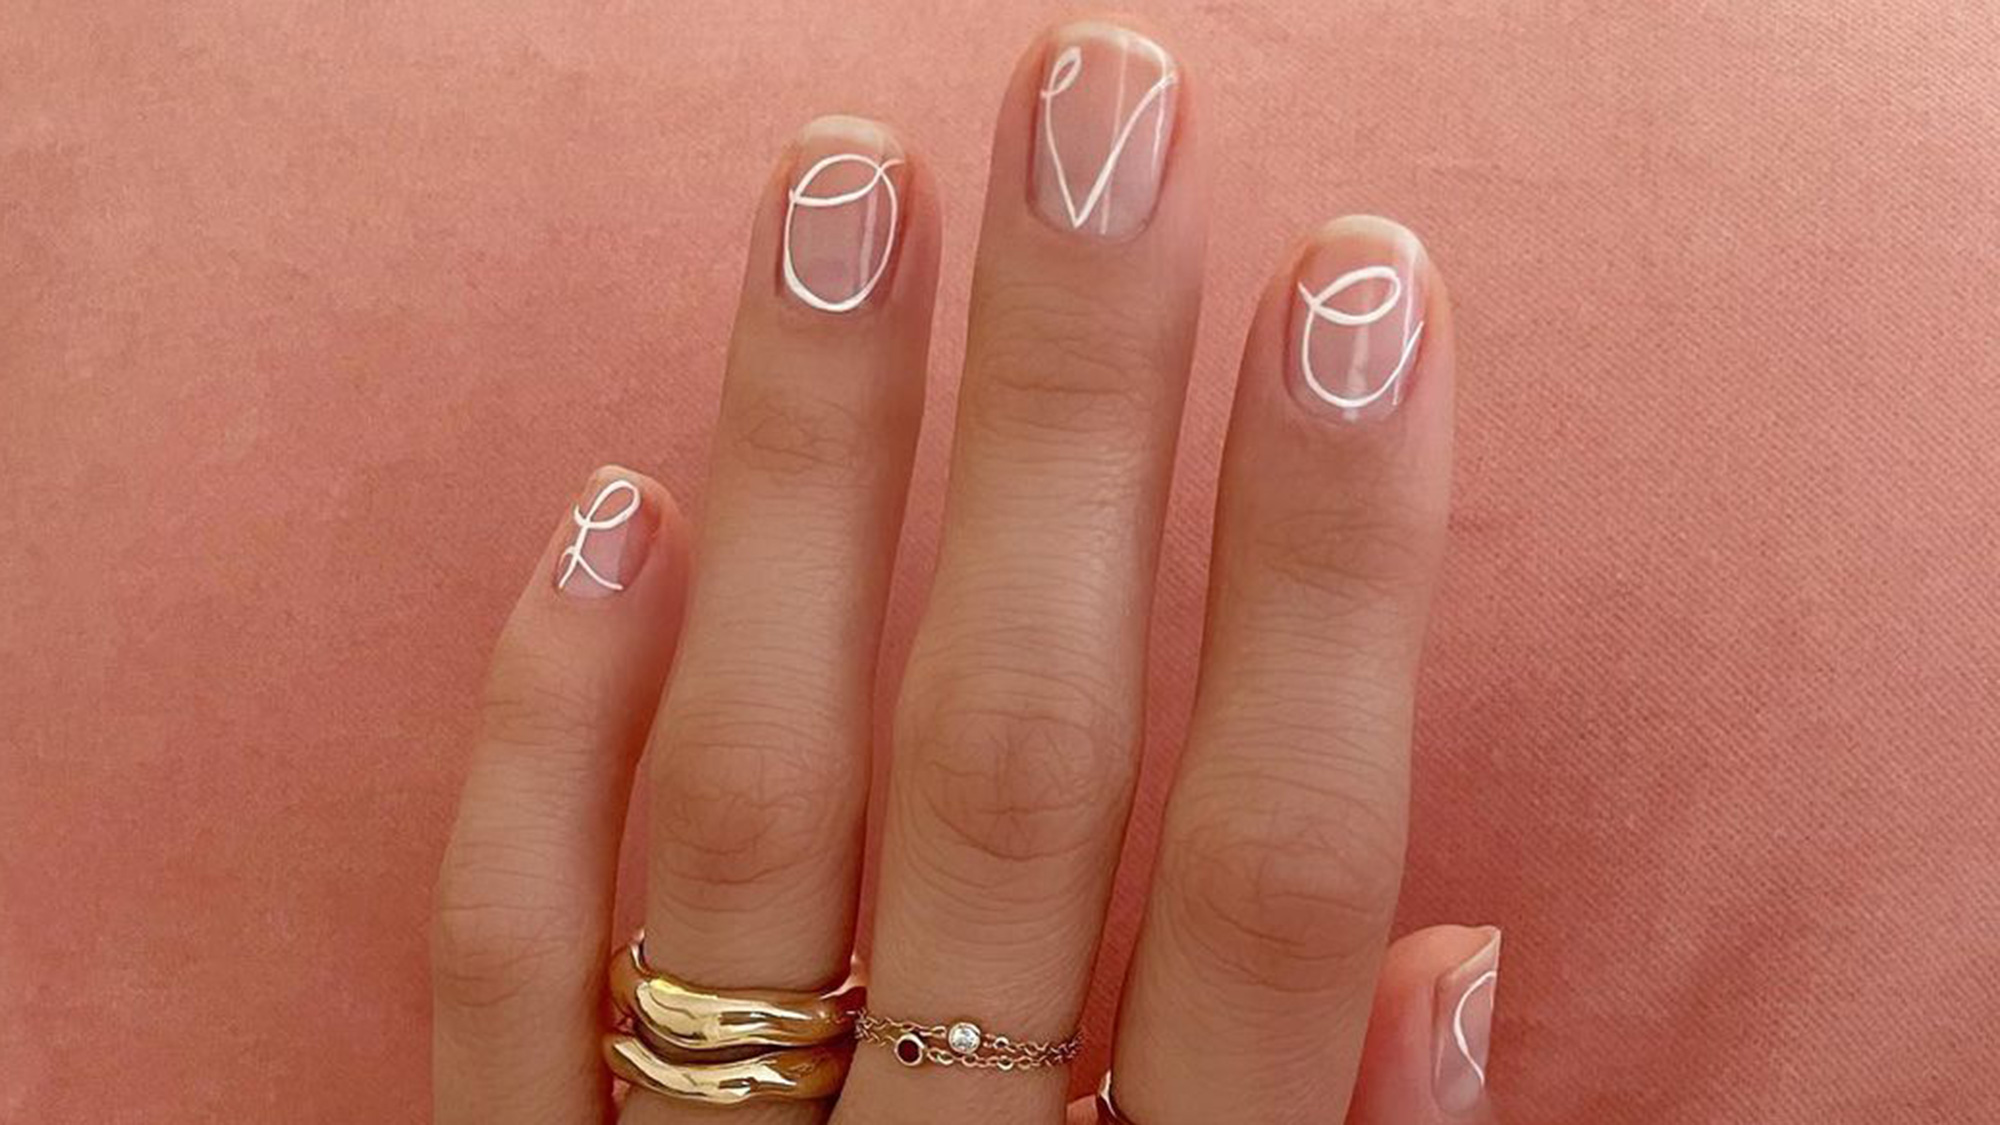 The Best Nail Trends of 2023 According to Nail Artists  See Photos   Allure